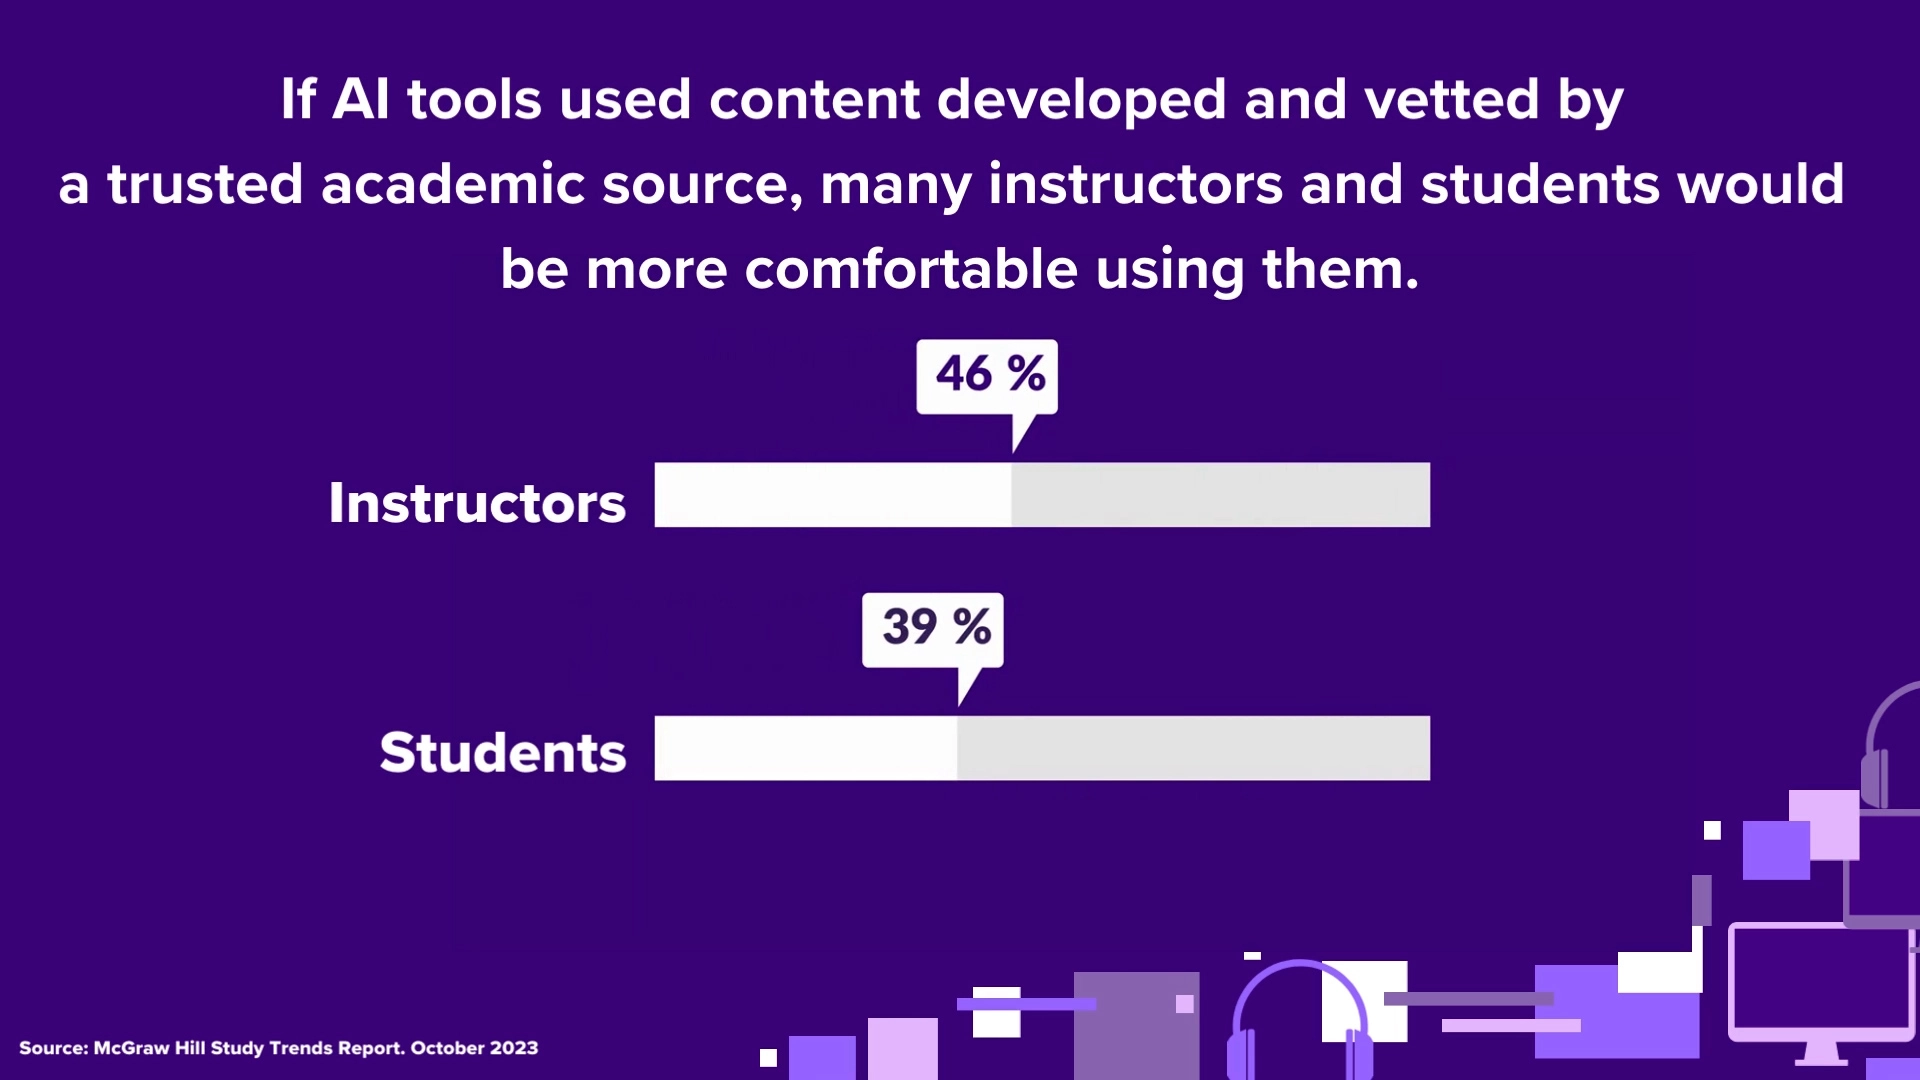 BetFiery Study Trends Report: If AI tools used content developed and vetted by a trusted academic source, many instructors and students would be more comfortable using them.